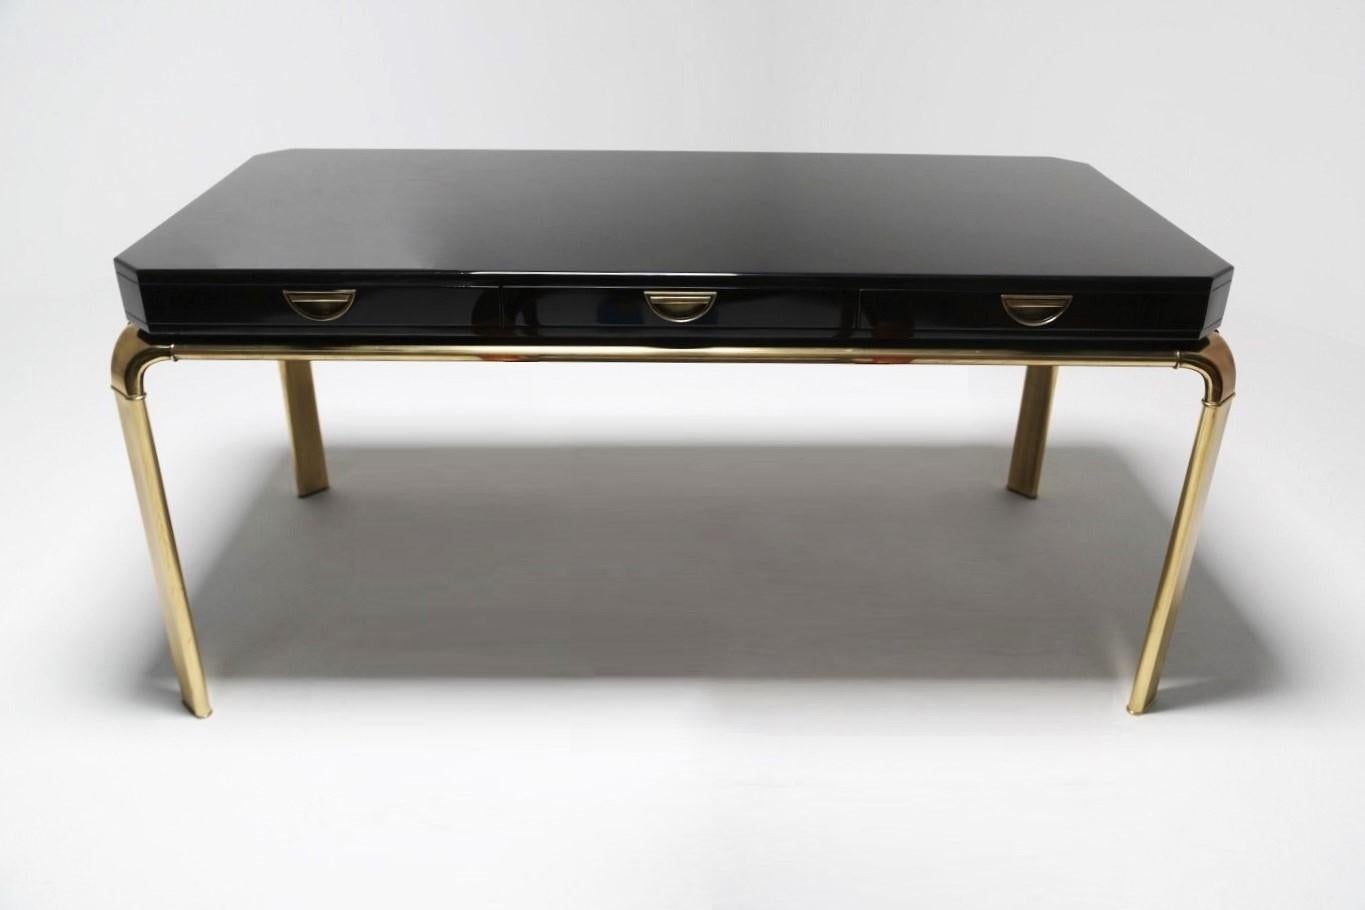 This Classic writing table or desk by John Widdicomb for Mastercraft. Composed of a large black lacquered wood top with canted corners that sits atop a brass frame. Brass legs swoop outwards and evoke the graceful line of a waterfall. Recessed